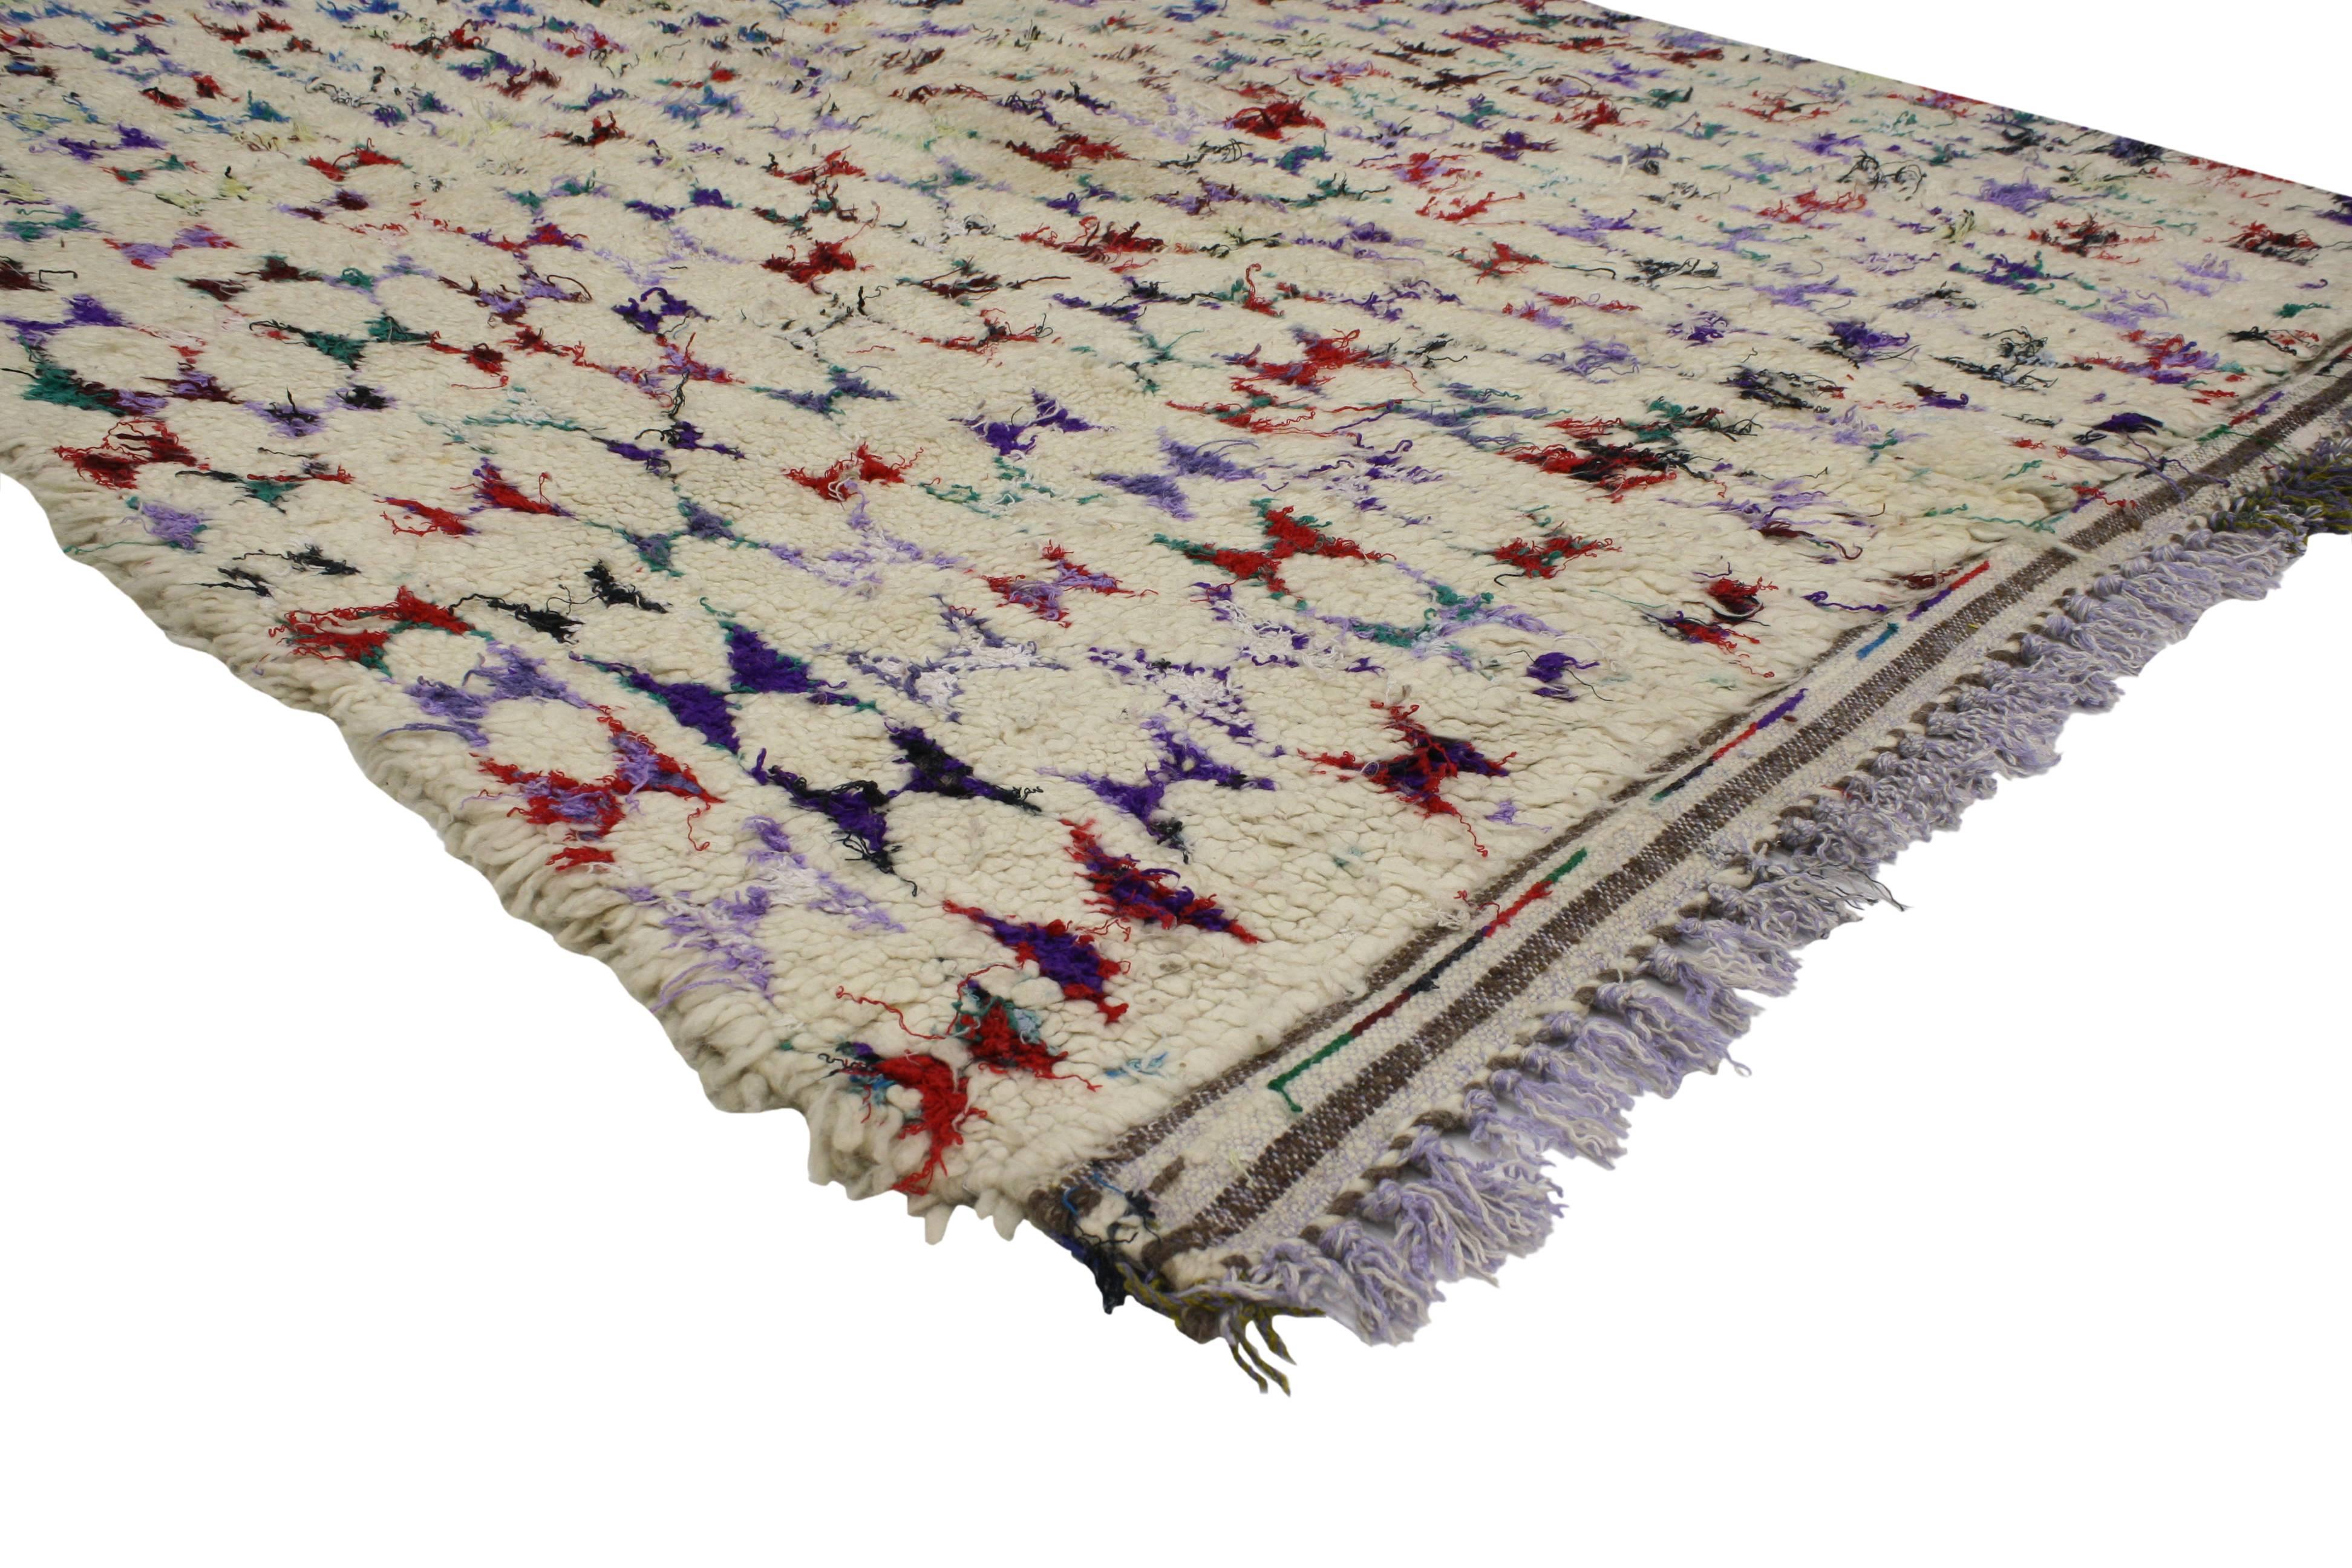 20430 Vintage Berber Moroccan Azilal Rug with Post-Modern Memphis Style. An eclectic love for Post-Modern Memphis style and a kaleidoscope of rainbow colors, this hand-knotted wool vintage Moroccan Azilal rug is brimming with liveliness and ancient